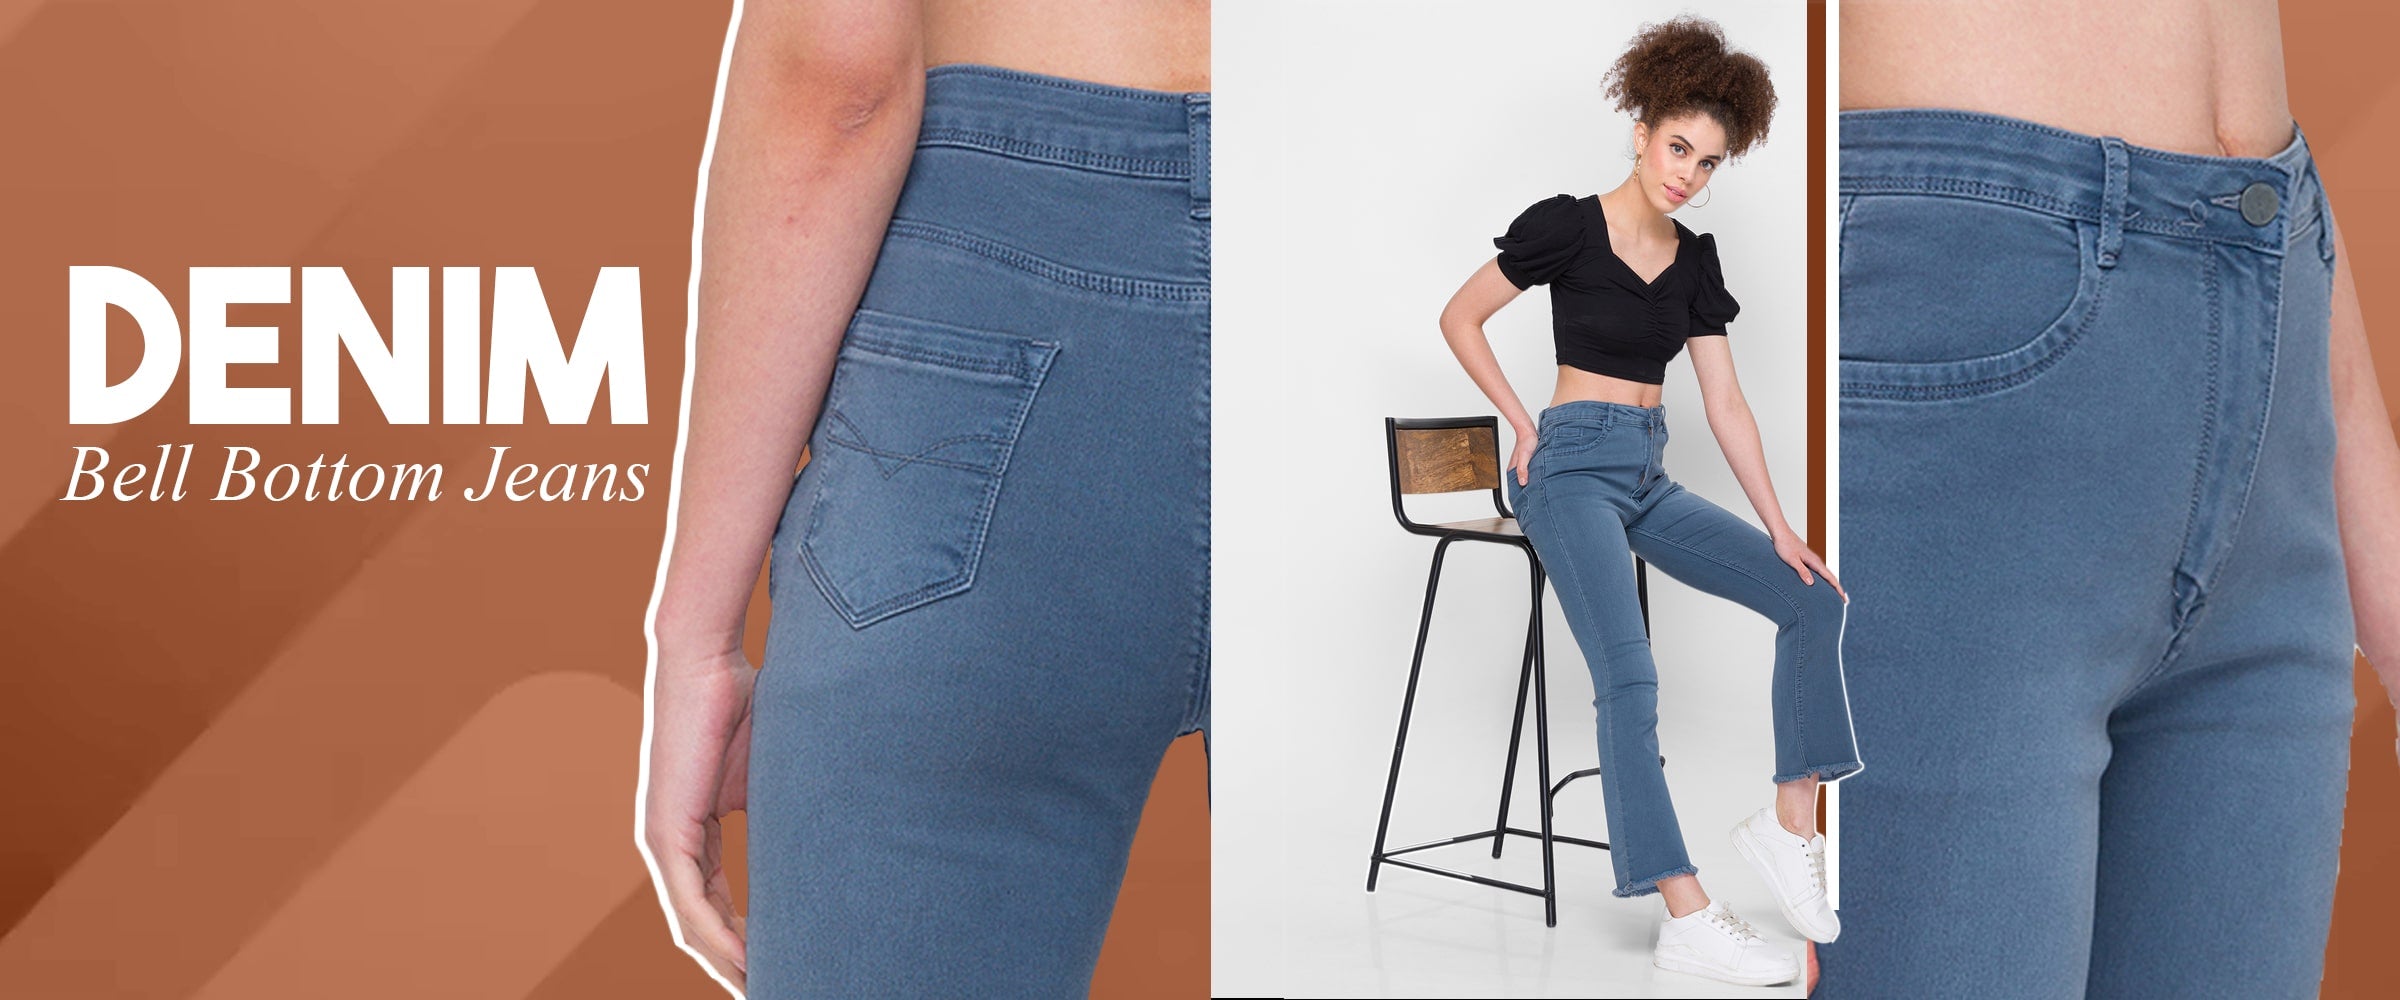 High Waist, High Style: Elevate Your Look with Trendy Jeans for Women